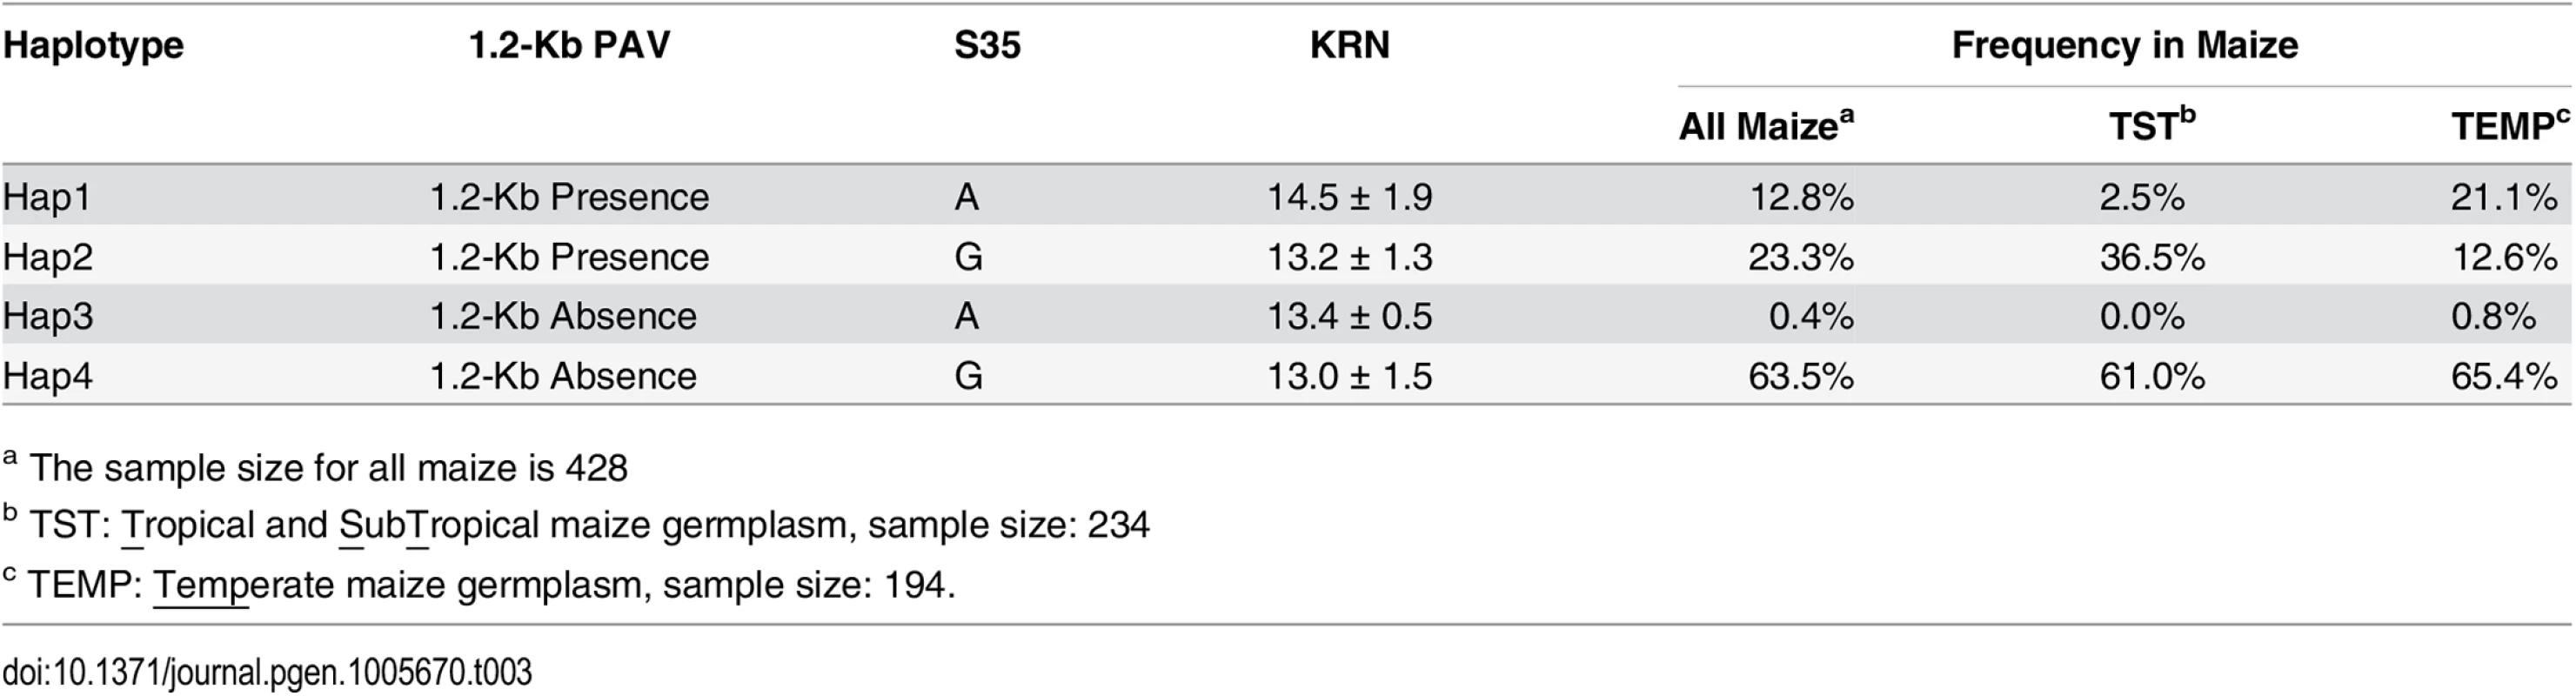 KRN and frequencies of haplotypes between 1.2-Kb PAV and S35.